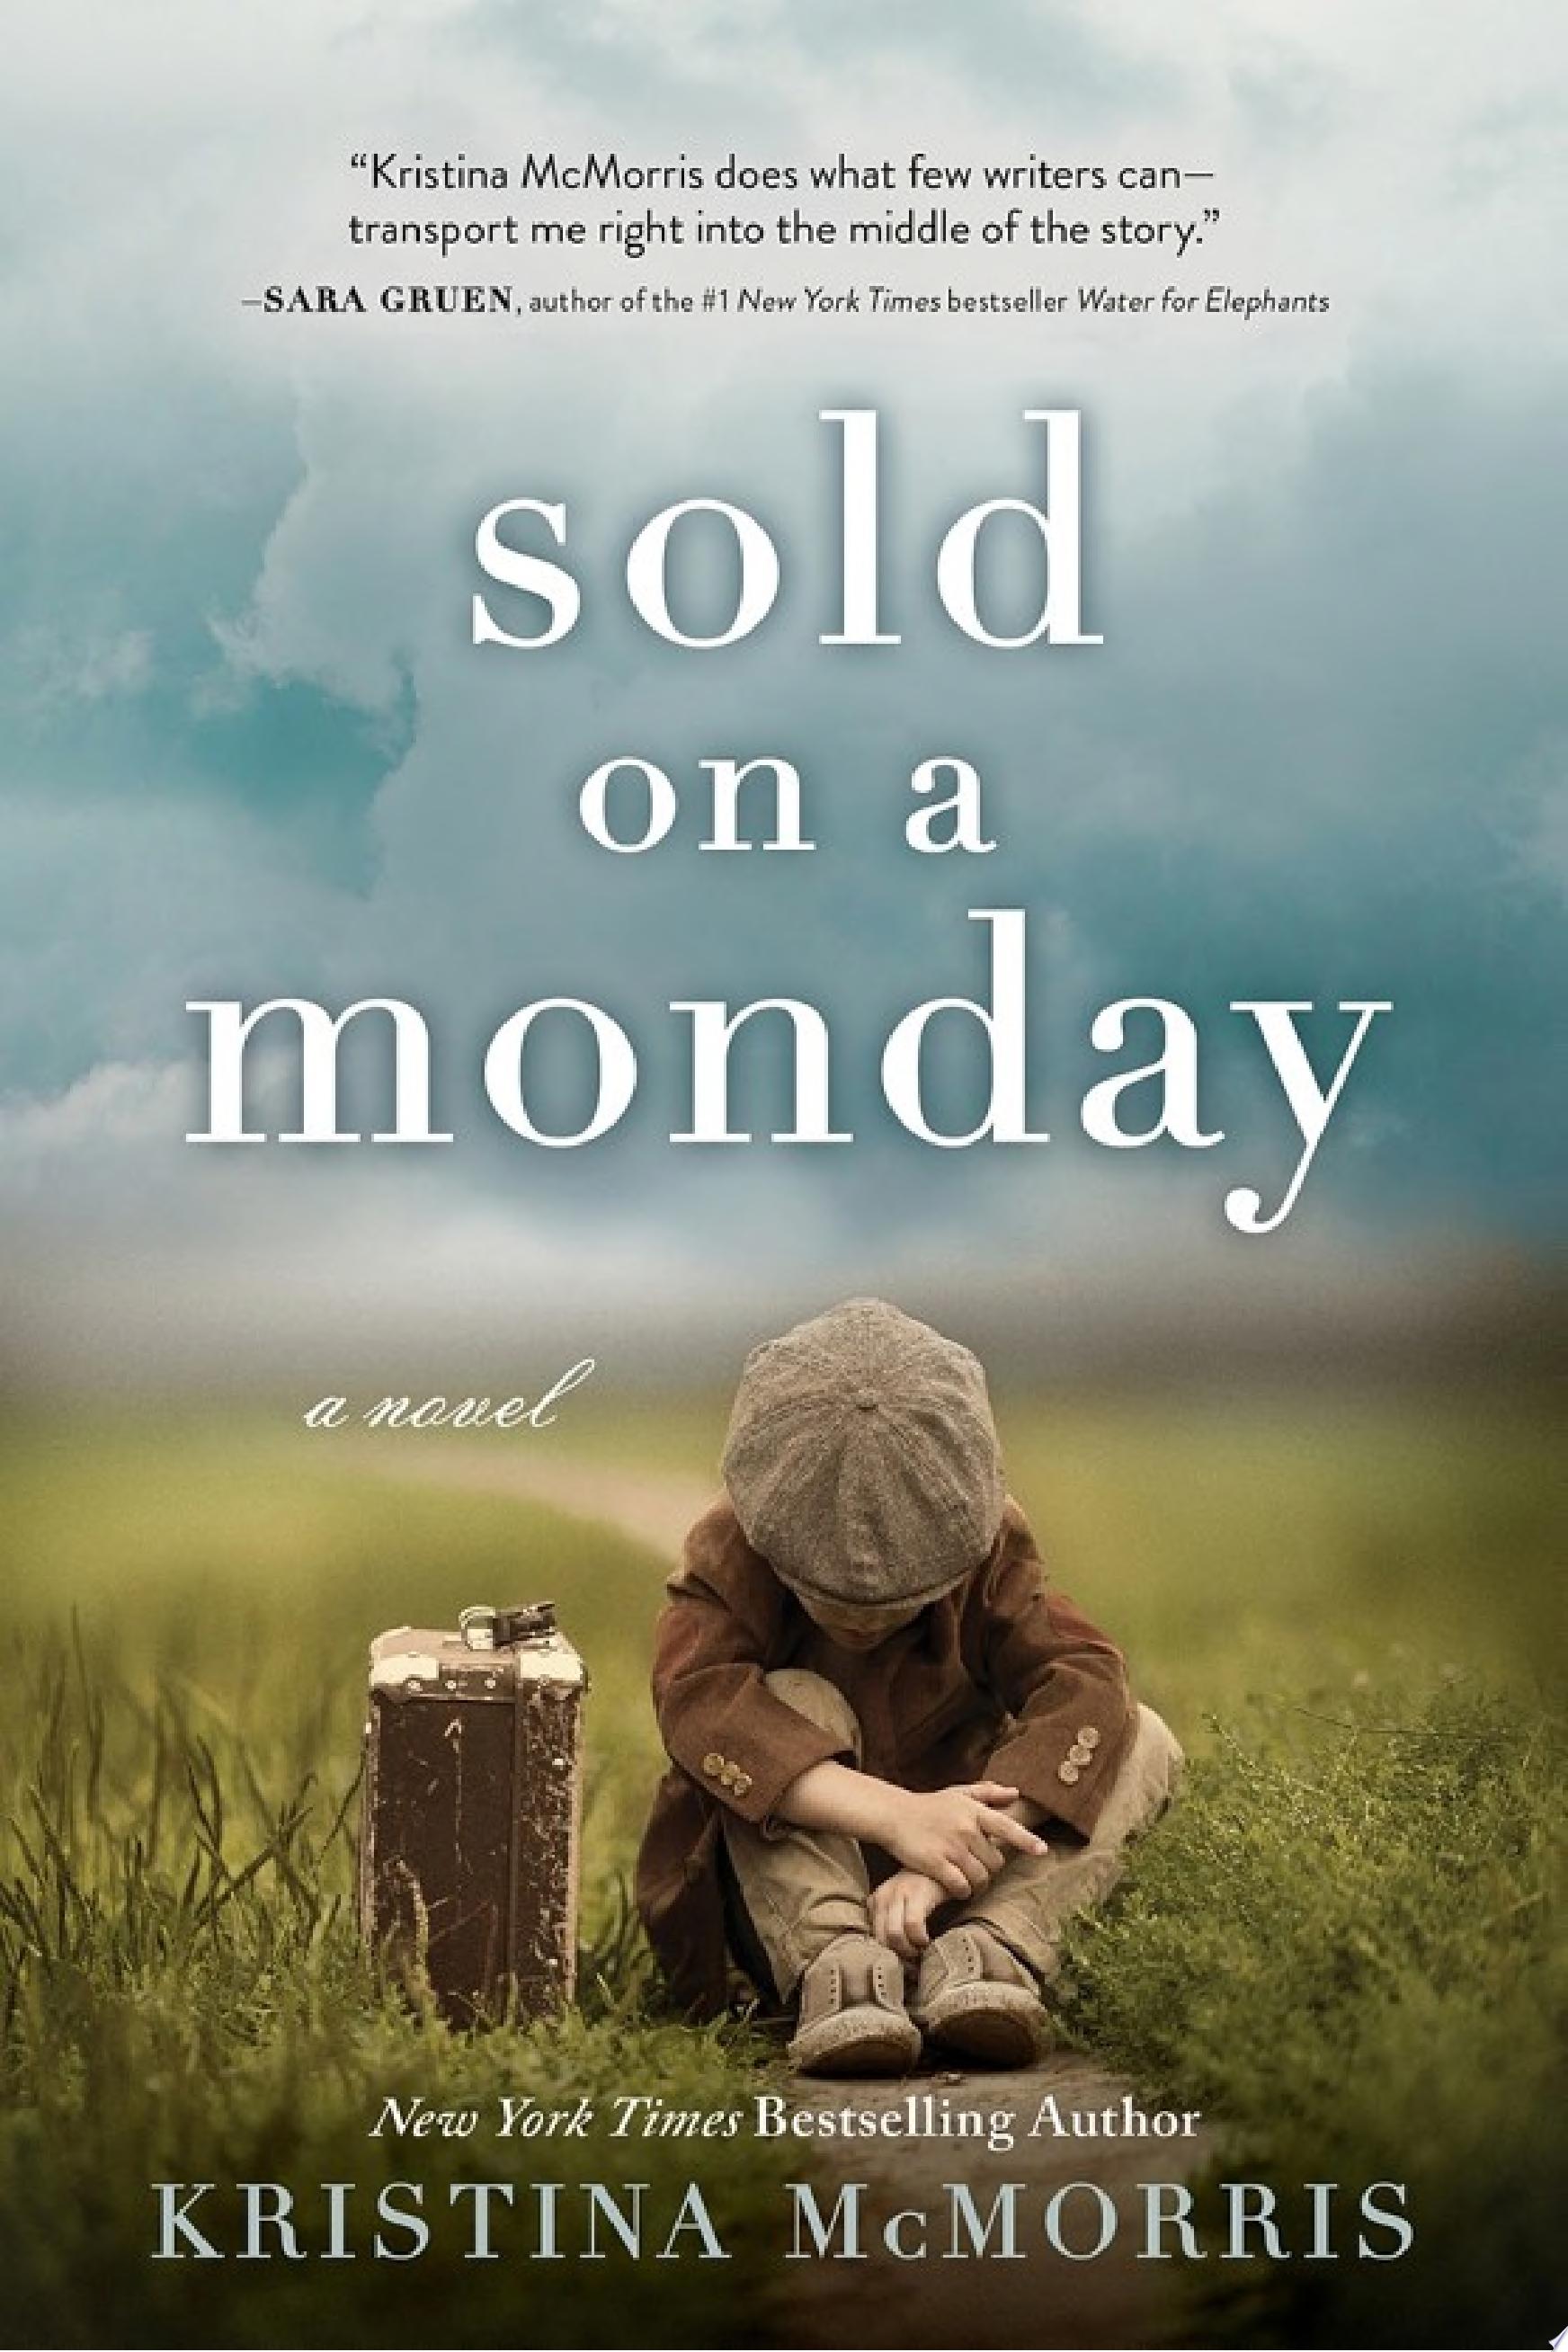 Image for "Sold on a Monday"